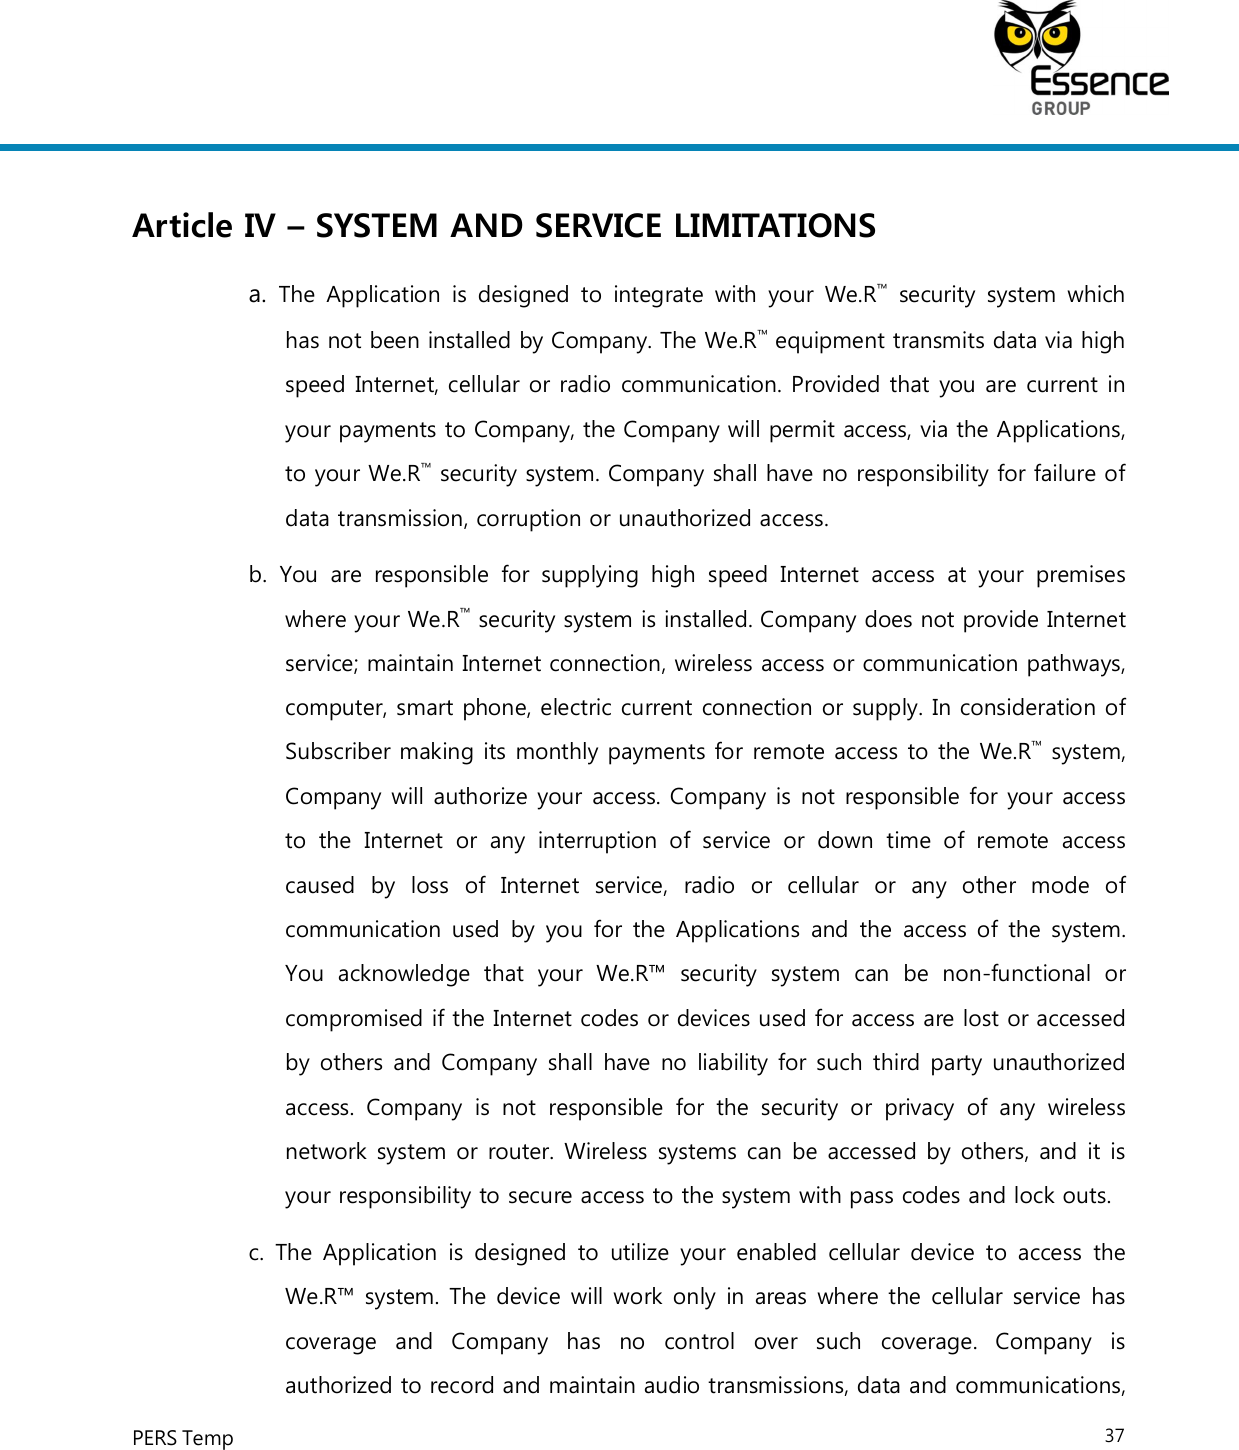     PERS Temp    37  Article IV – SYSTEM AND SERVICE LIMITATIONS a.  The  Application  is  designed to  integrate  with  your  We.R™  security  system  which has not been installed by Company. The We.R™ equipment transmits data via high speed Internet, cellular or radio communication. Provided that you are current in your payments to Company, the Company will permit access, via the Applications, to your We.R™ security system. Company shall have no responsibility for failure of data transmission, corruption or unauthorized access. b.  You  are  responsible  for  supplying  high  speed  Internet  access  at  your  premises where your We.R™ security system is installed. Company does not provide Internet service; maintain Internet connection, wireless access or communication pathways, computer, smart phone, electric current connection or supply. In consideration of Subscriber making its monthly payments for remote access to the We.R™ system, Company will authorize your access. Company is not responsible for your access to  the  Internet  or  any  interruption  of  service  or  down  time  of  remote  access caused  by  loss  of  Internet  service,  radio  or  cellular  or  any  other  mode  of communication used by you for the  Applications  and the access of  the system. You  acknowledge  that  your  We.R™  security  system  can  be  non-functional  or compromised if the Internet codes or devices used for access are lost or accessed by others and Company shall have no liability for such third party unauthorized access.  Company  is  not  responsible  for  the  security  or  privacy  of  any  wireless network system or router. Wireless systems can be accessed by others, and it is your responsibility to secure access to the system with pass codes and lock outs. c.  The  Application  is designed  to  utilize  your  enabled  cellular device to  access  the We.R™ system. The device will work only in areas where the cellular service has coverage  and  Company  has  no  control  over  such  coverage.  Company  is authorized to record and maintain audio transmissions, data and communications, 